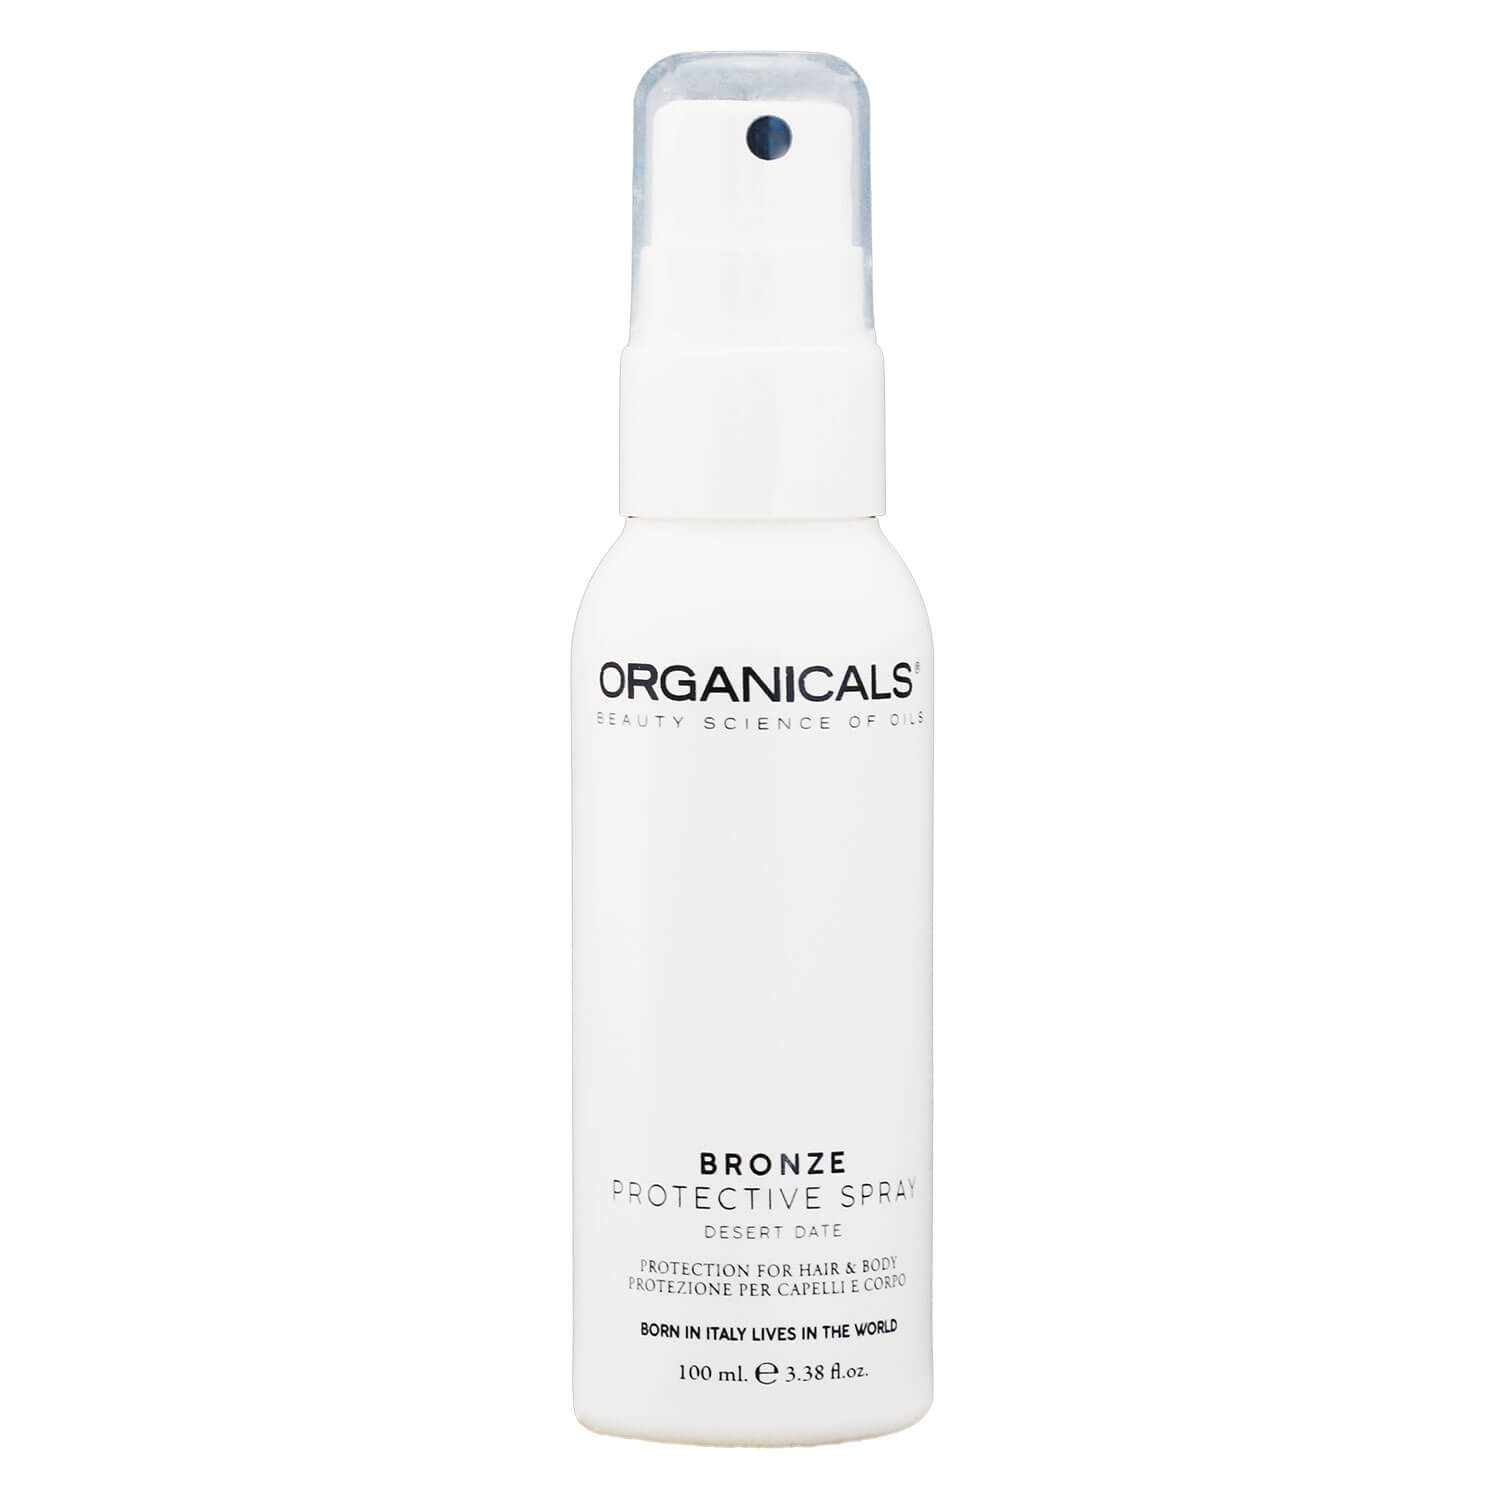 Product image from ORGANICALS - Bronze Protective Spray